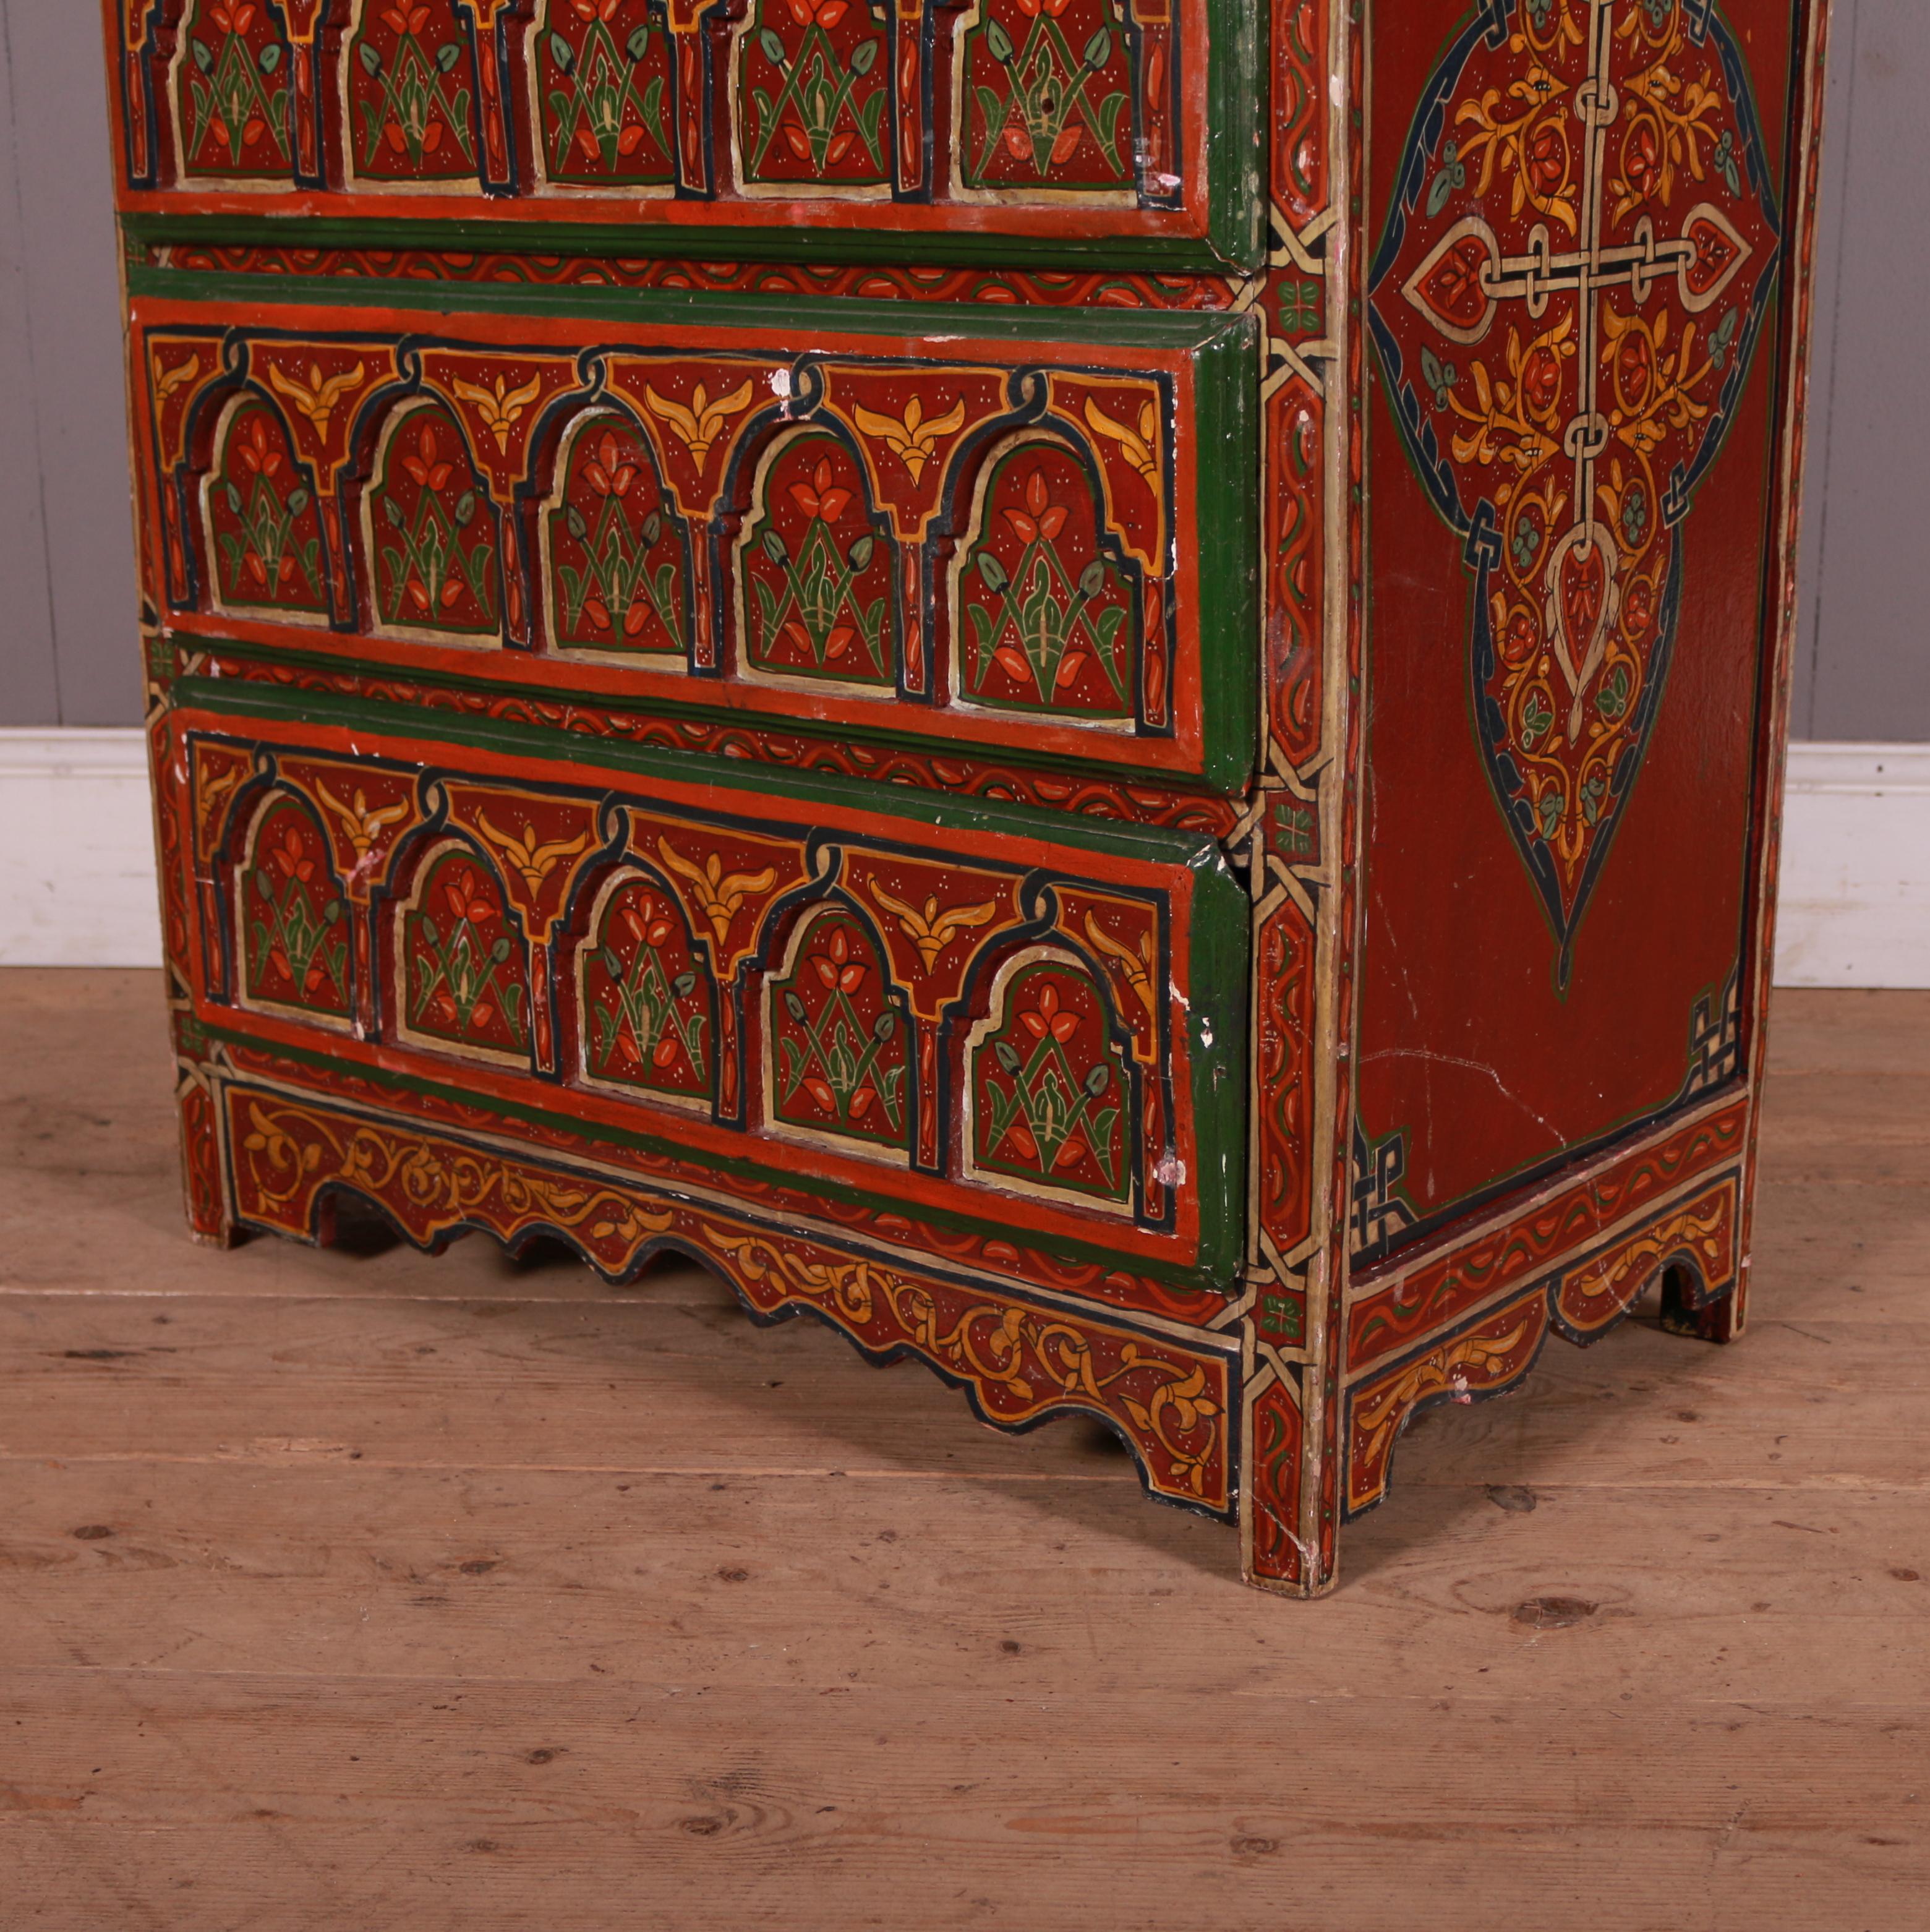 Decorative Moroccan Chest of Drawers In Good Condition For Sale In Leamington Spa, Warwickshire